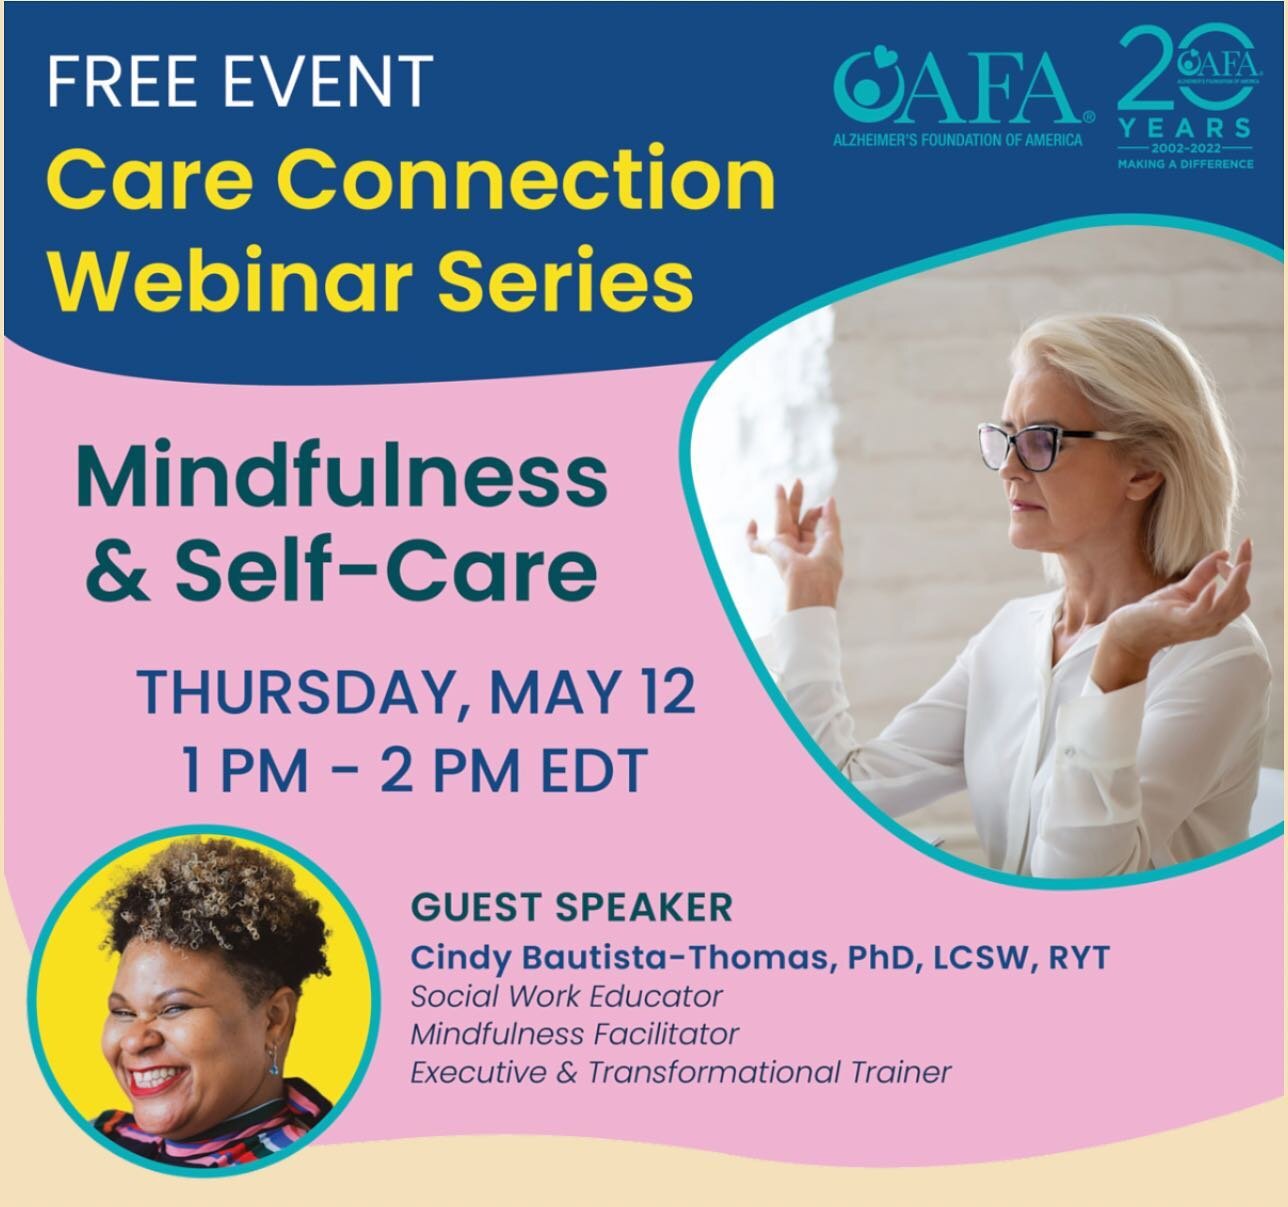 Join @drcindybautistathomas, social work educator, mindfulness facilitator, executive, and transformational trainer, for a 1-hour Care Connection on mindfulness and self-care, including leading us in a chair yoga practice. Leave this webinar with ski